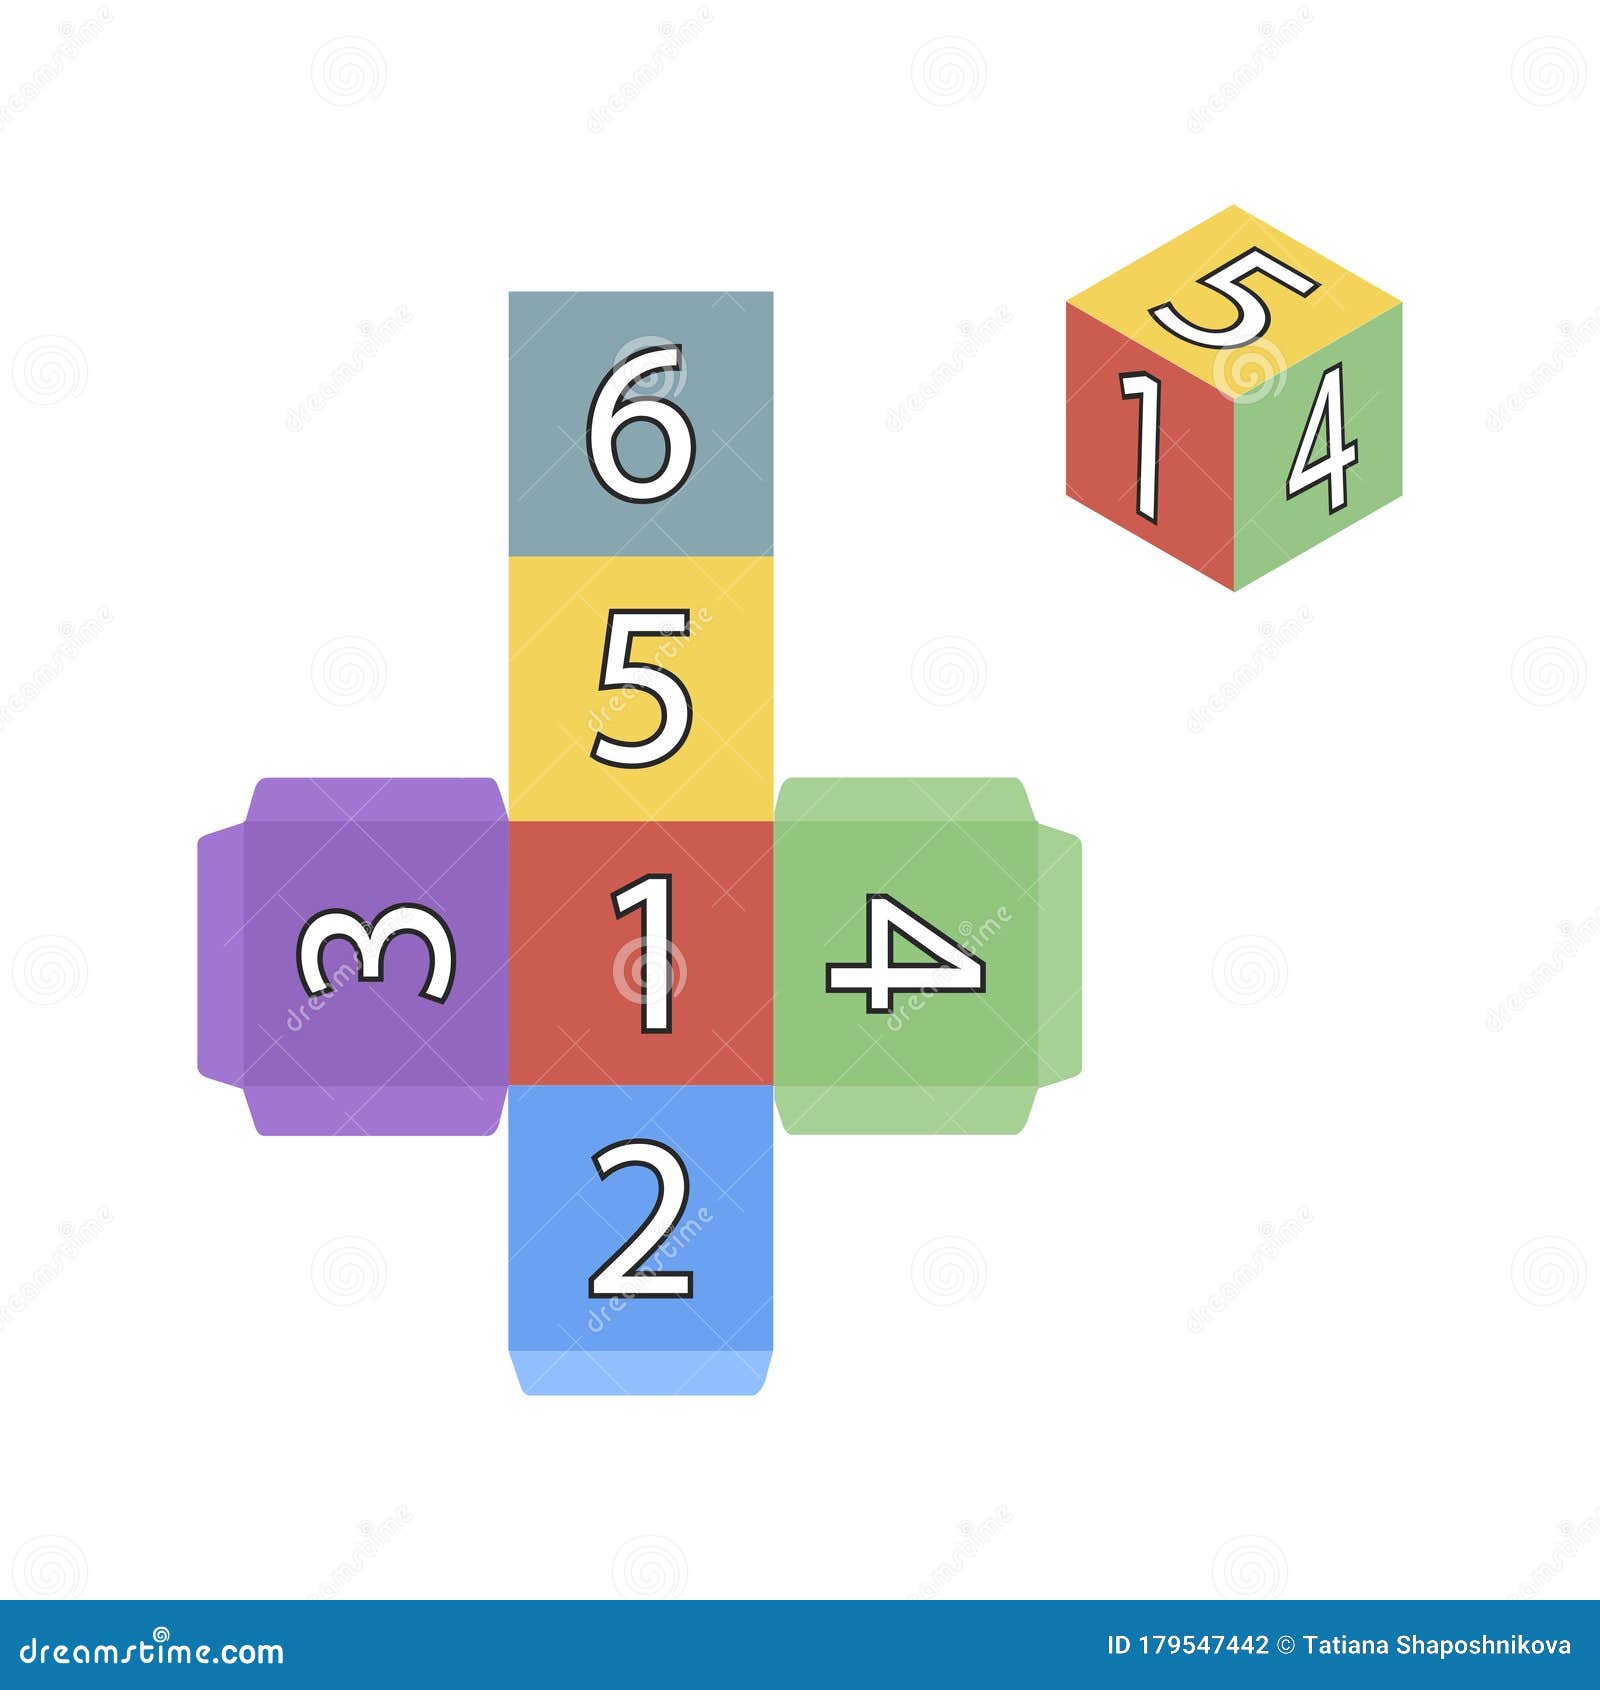 Number 24 Purple Color Cube On Stock Illustration 1290853486